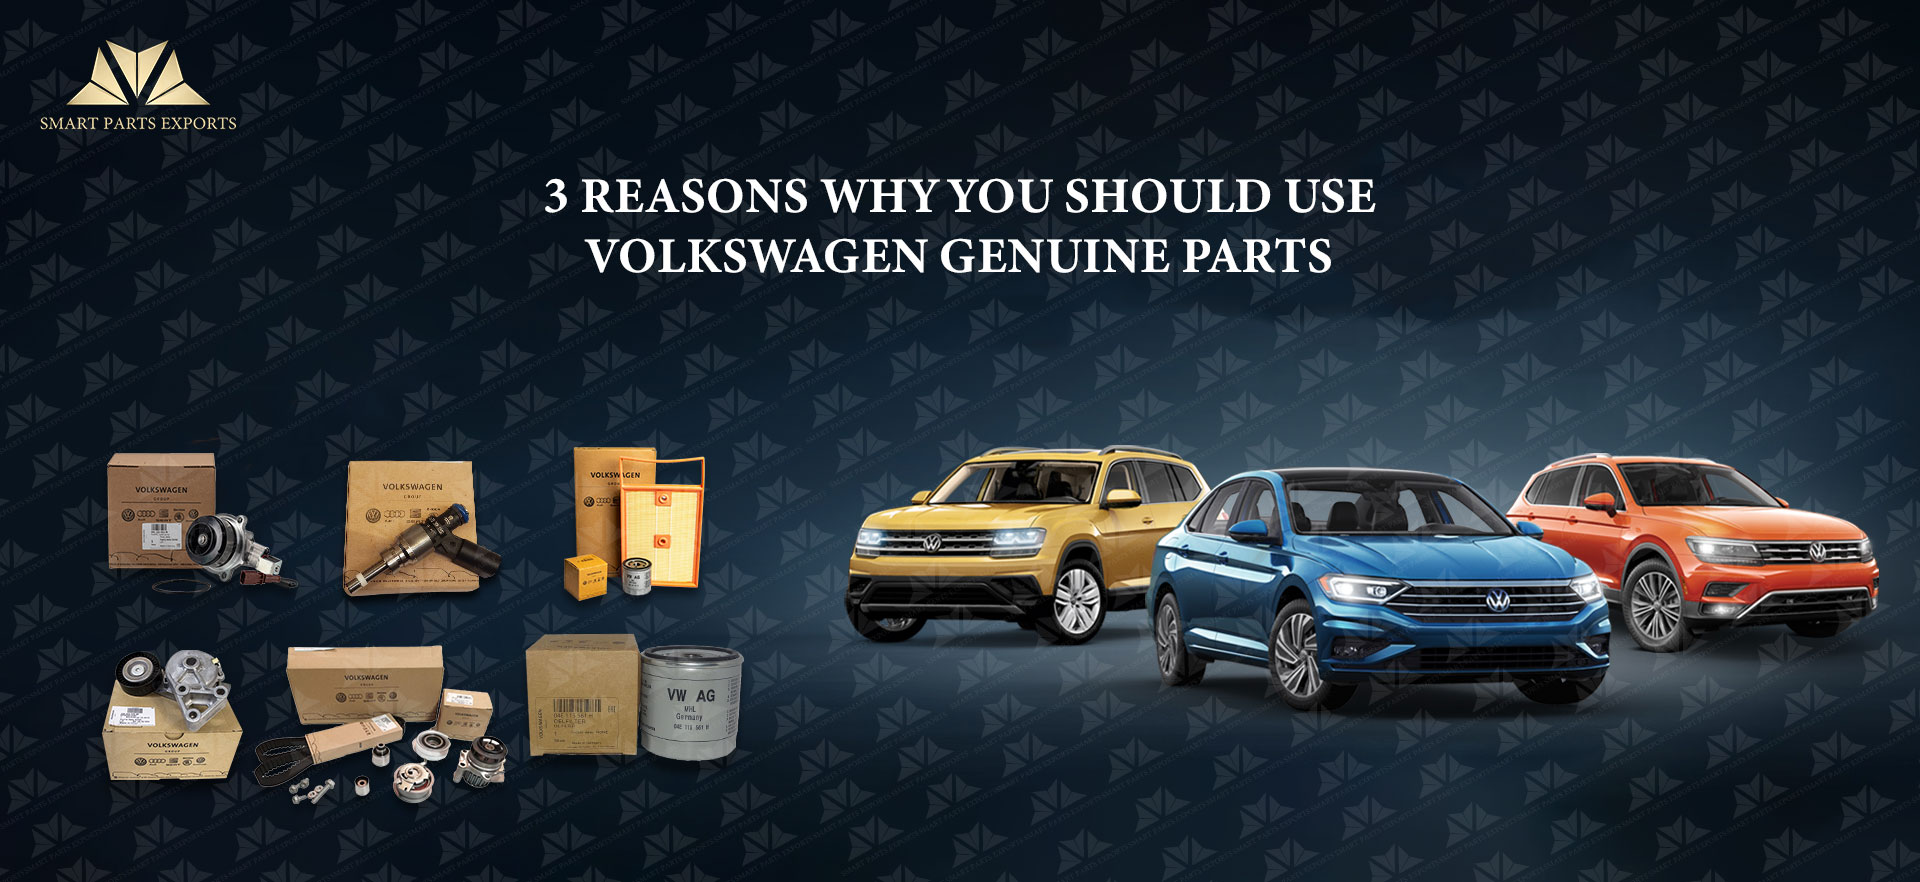 3 Reasons Why You Should Use Volkswagen Genuine Parts